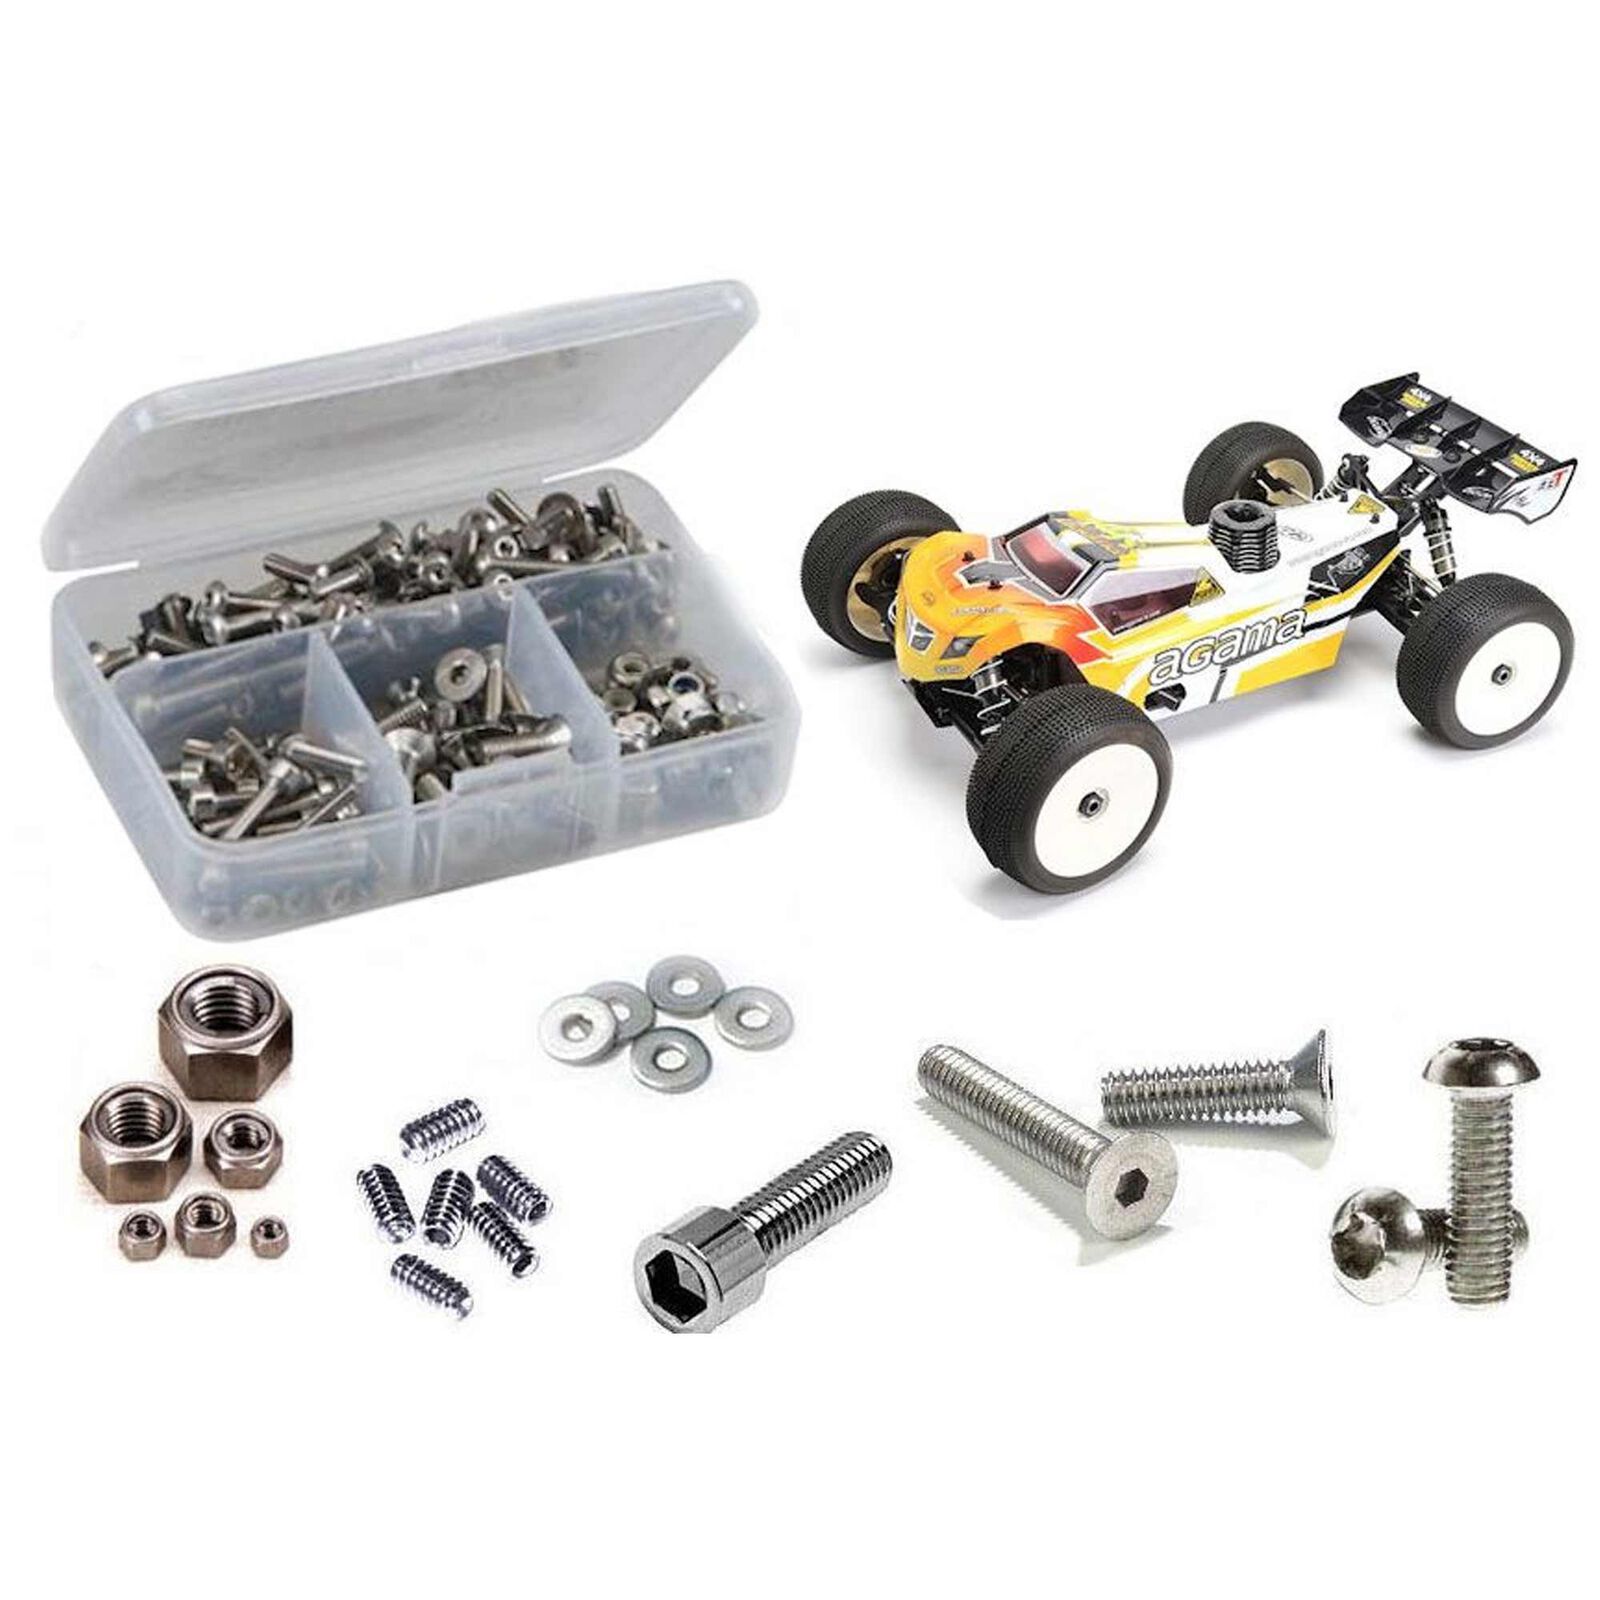 Agama Racing A8T/Evo 1/8th Nitro Truggy Stainless Steel Screw Kit